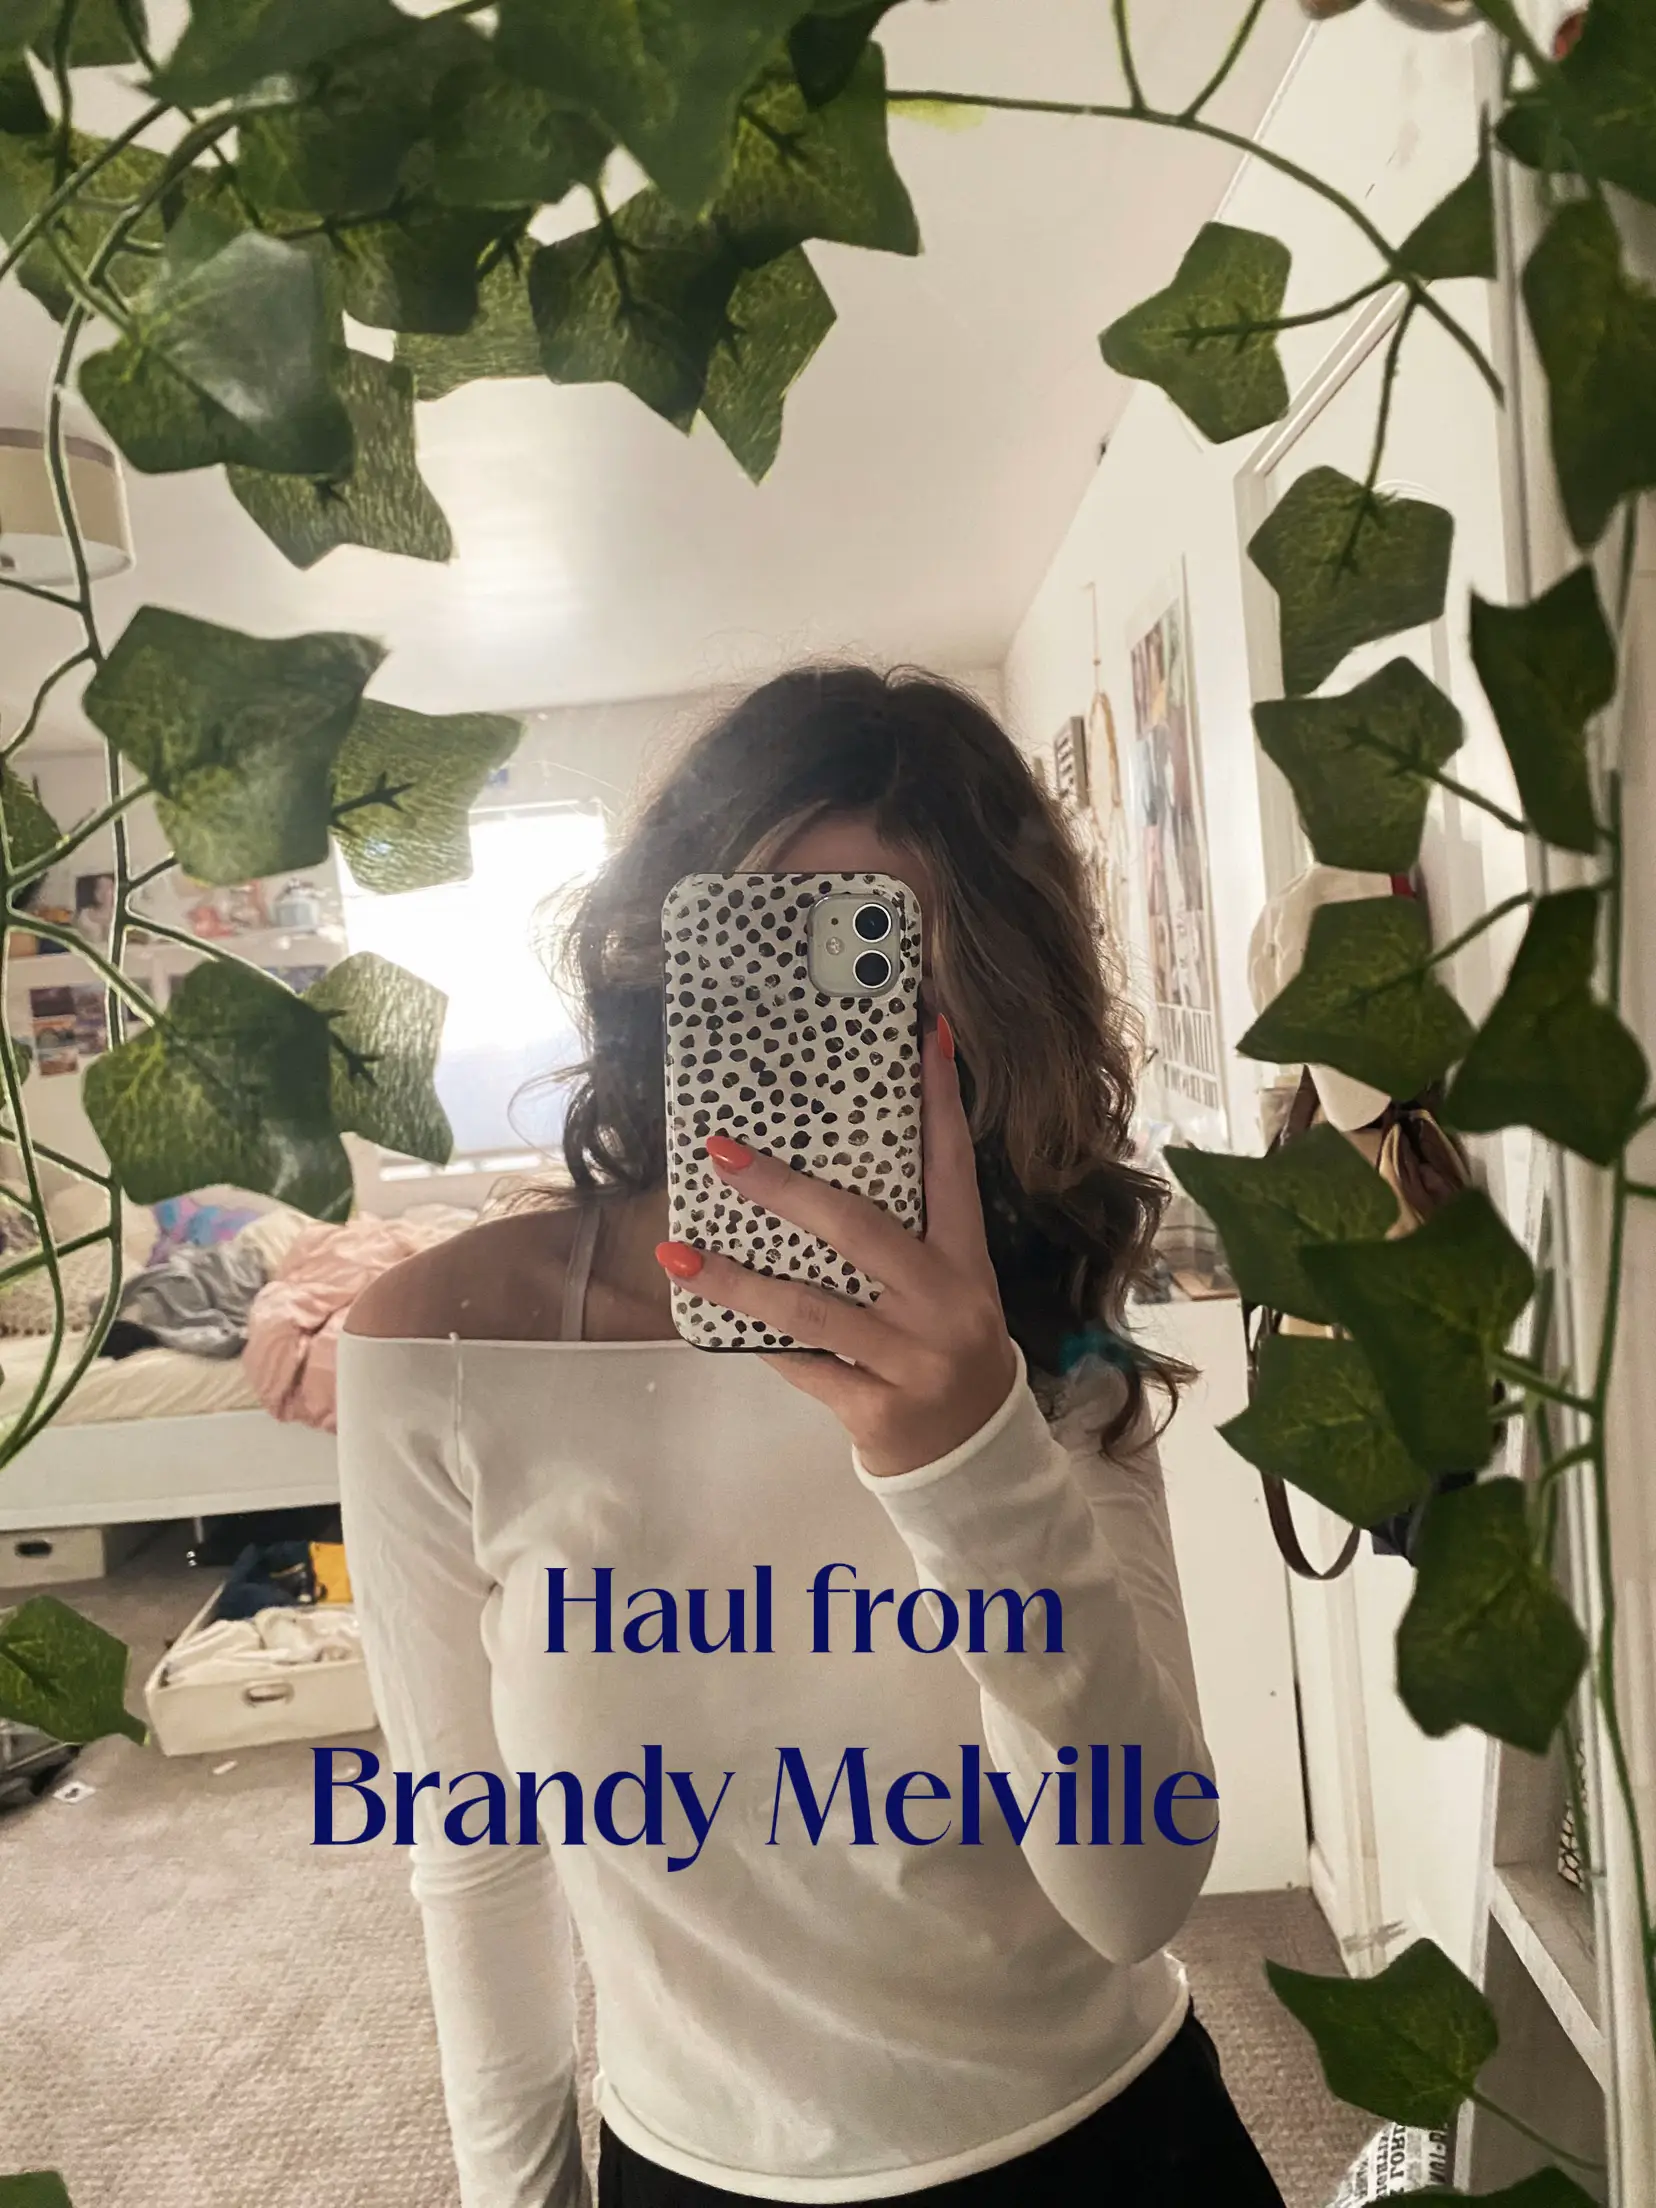 Cutest Brandy top I've seen in a while. Couldn't resist buying it. : r/ BrandyMelville